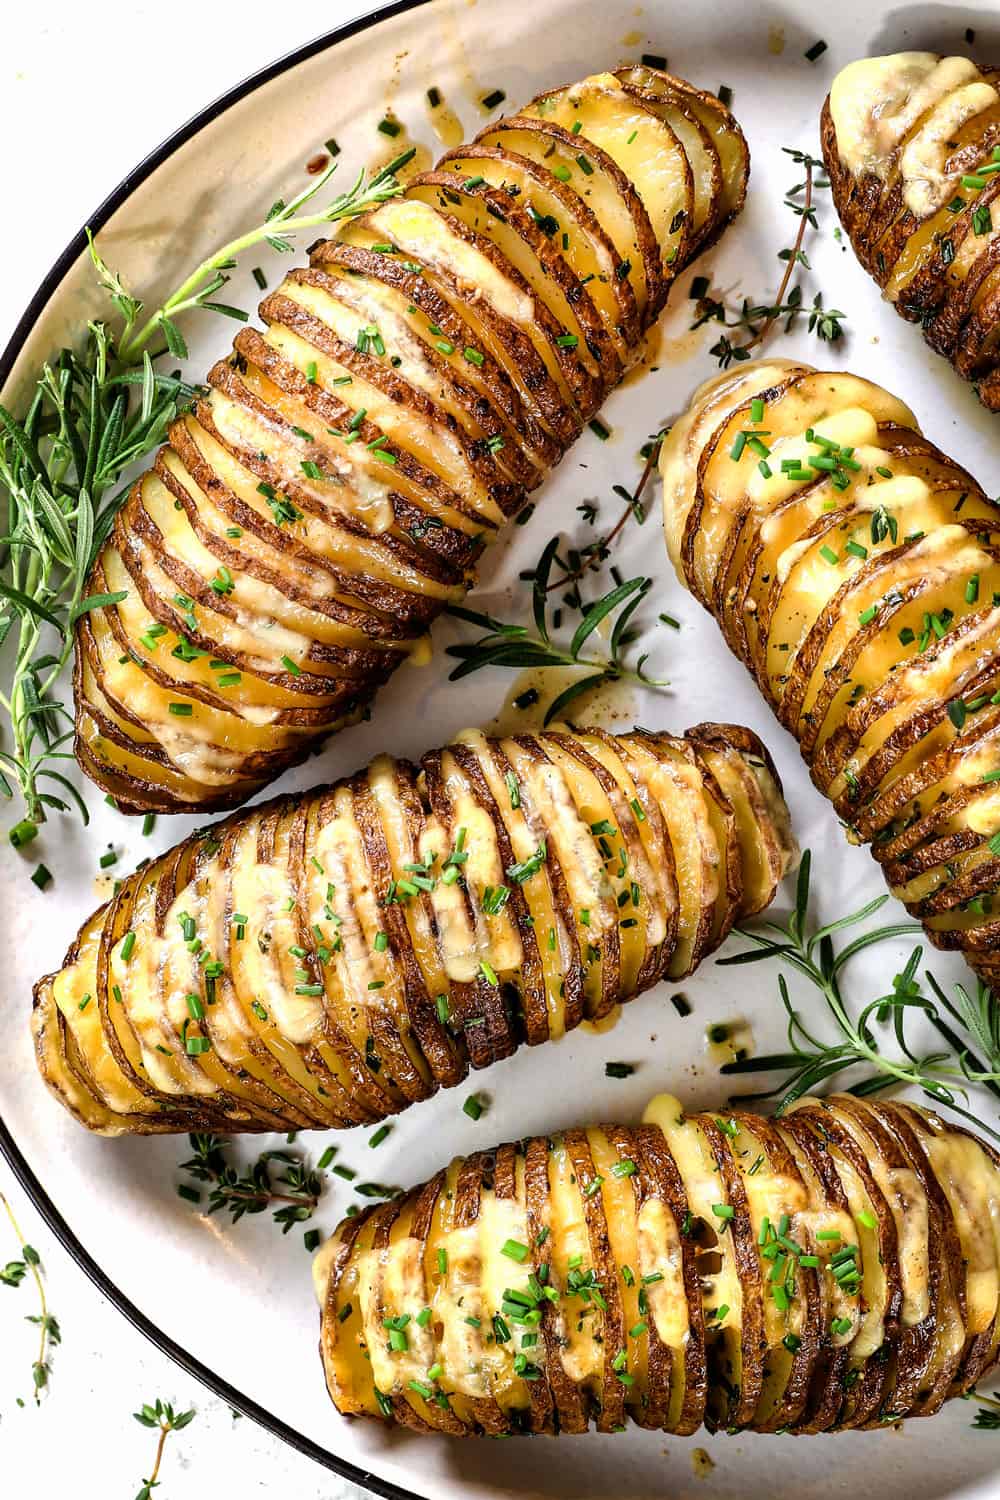 top view of Hasselback potato recipe on a plate garnished with thyme and rosemary